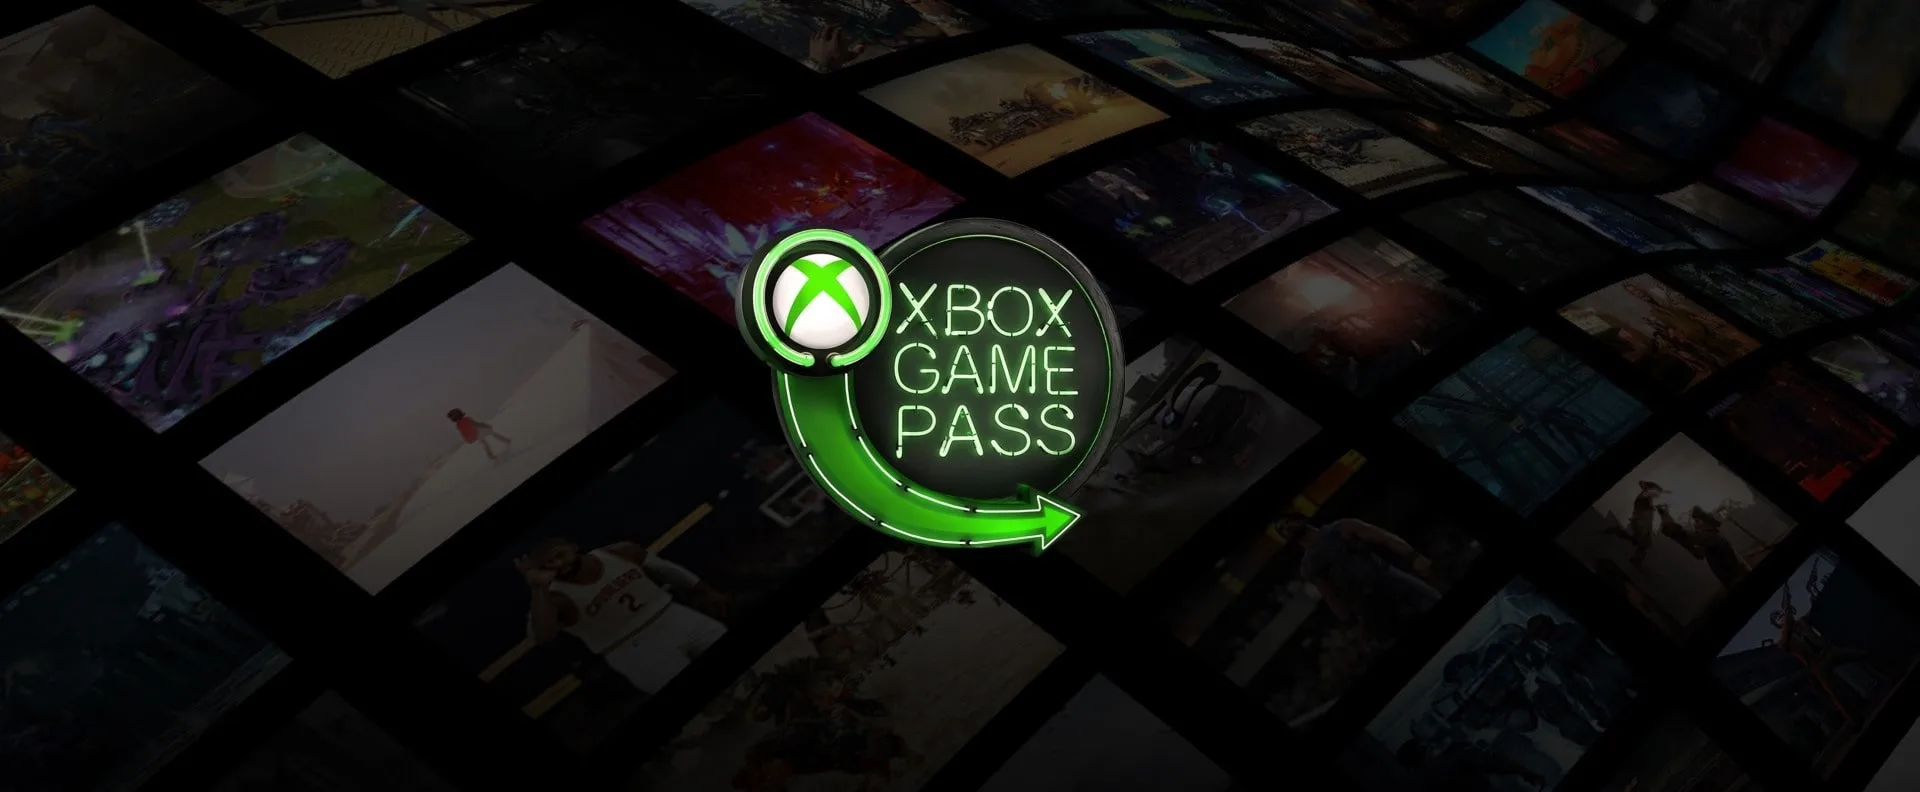 New Games Added to Xbox Game Pass